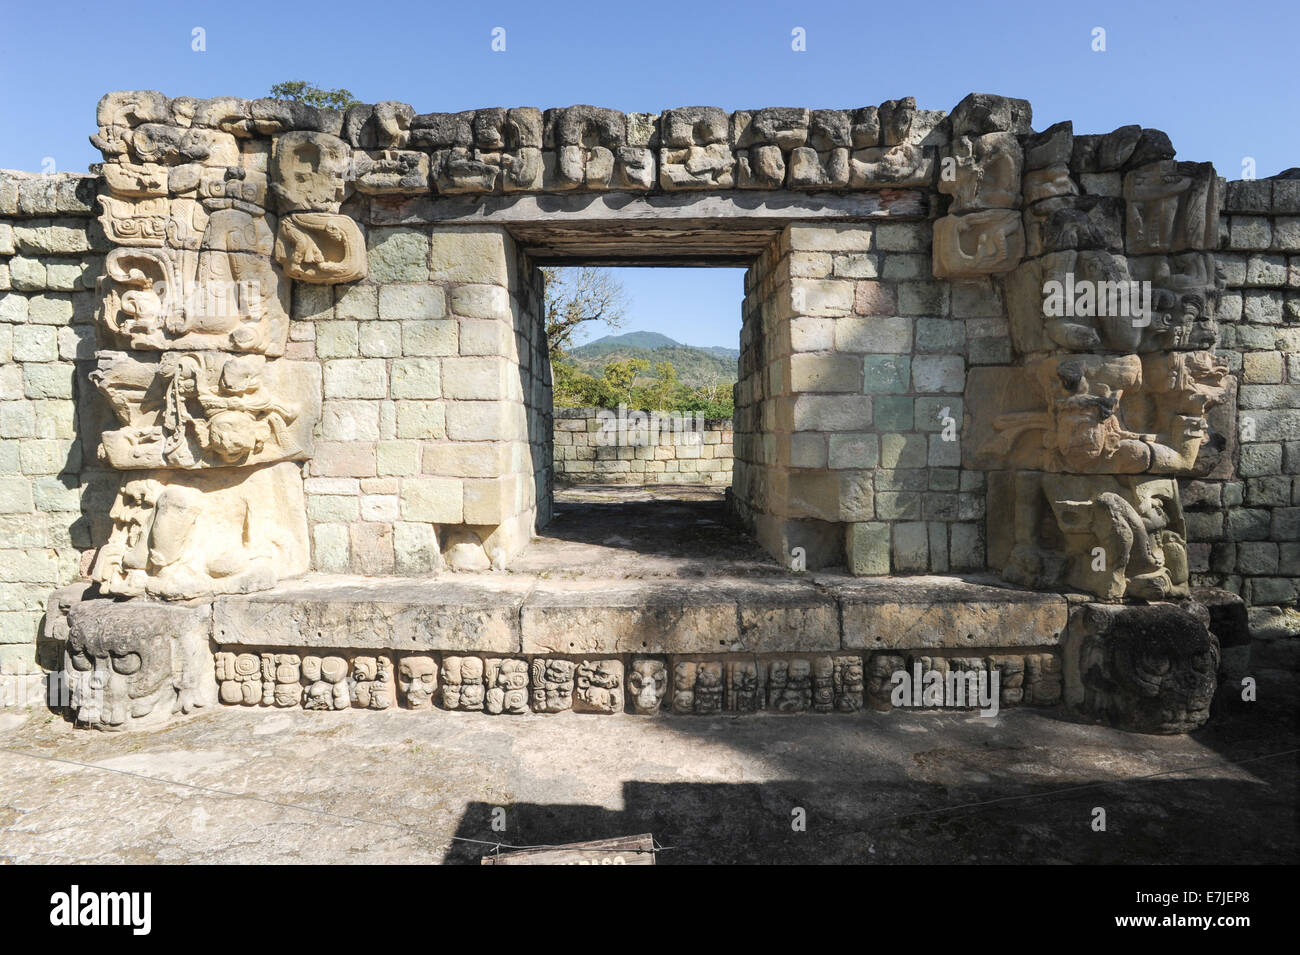 Central America, Americas, ancient, archaeology, architecture, building, built, carved, copan, culture, door, patio, exterior, g Stock Photo